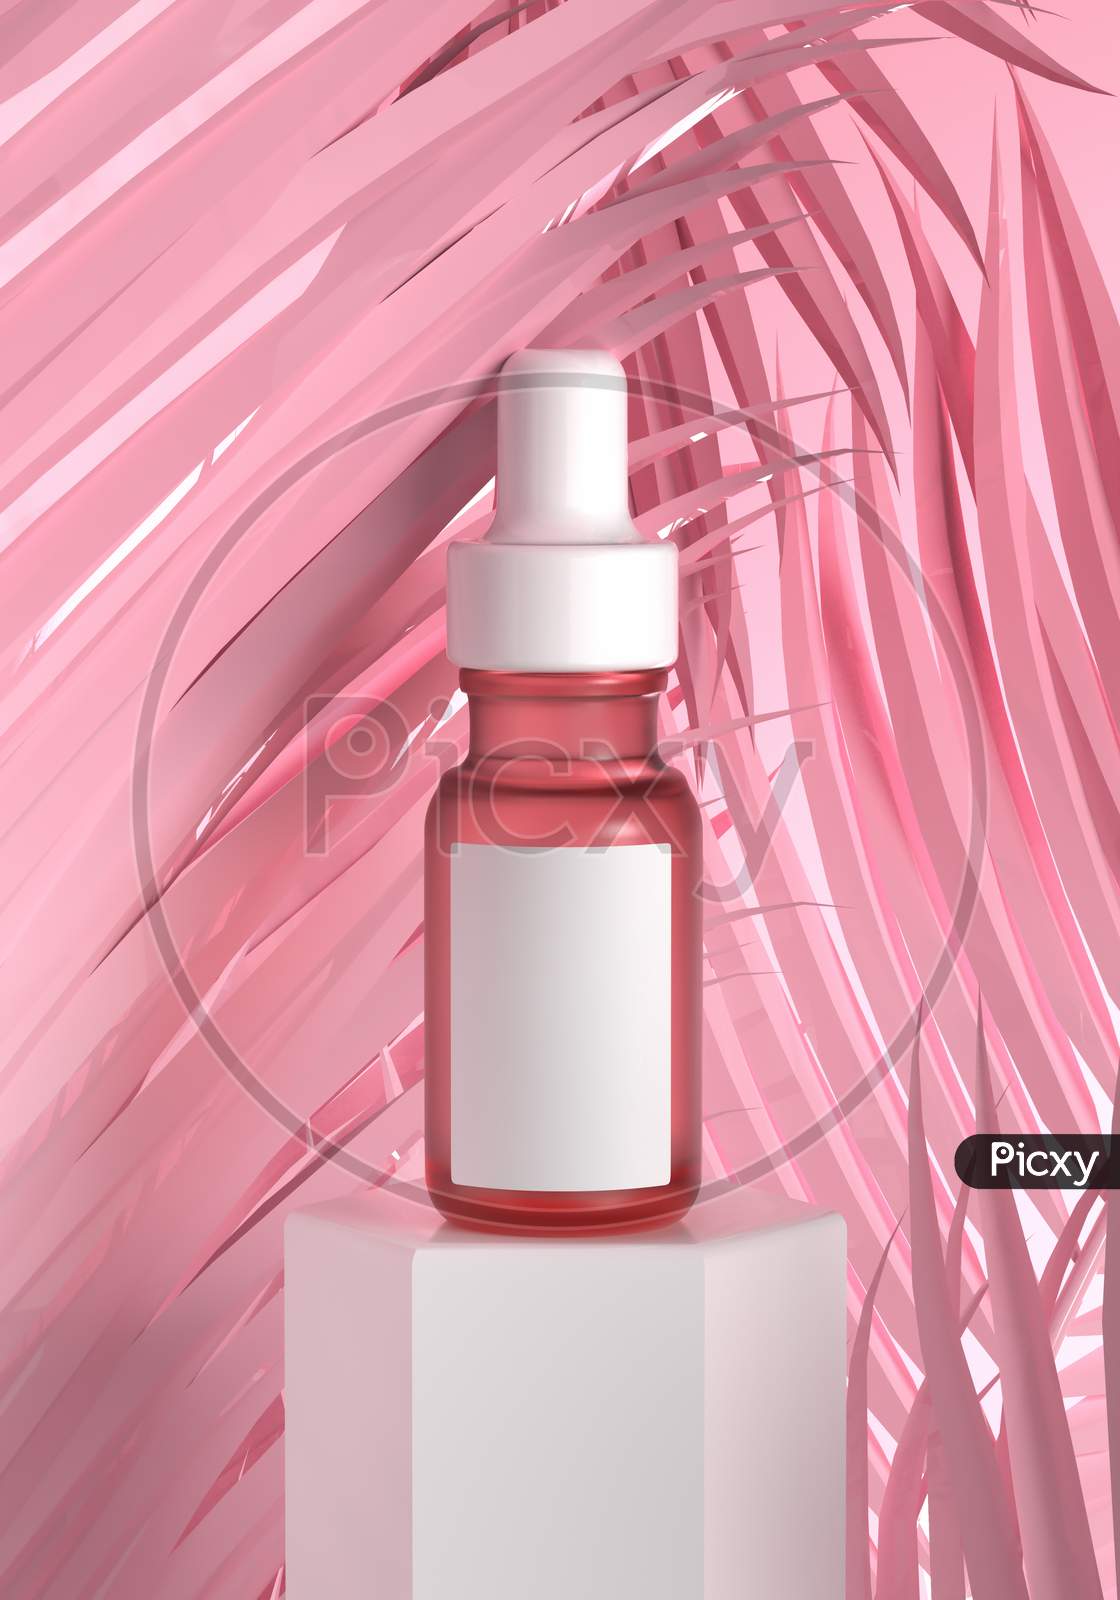 Cosmetic Serum Bottle Mockup Product With Empty Blank Label On White Stage And Pink Pastel Leaves Background. Health And Makeup Advertising Skincare Marketing Concept. 3D Illustration Rendering